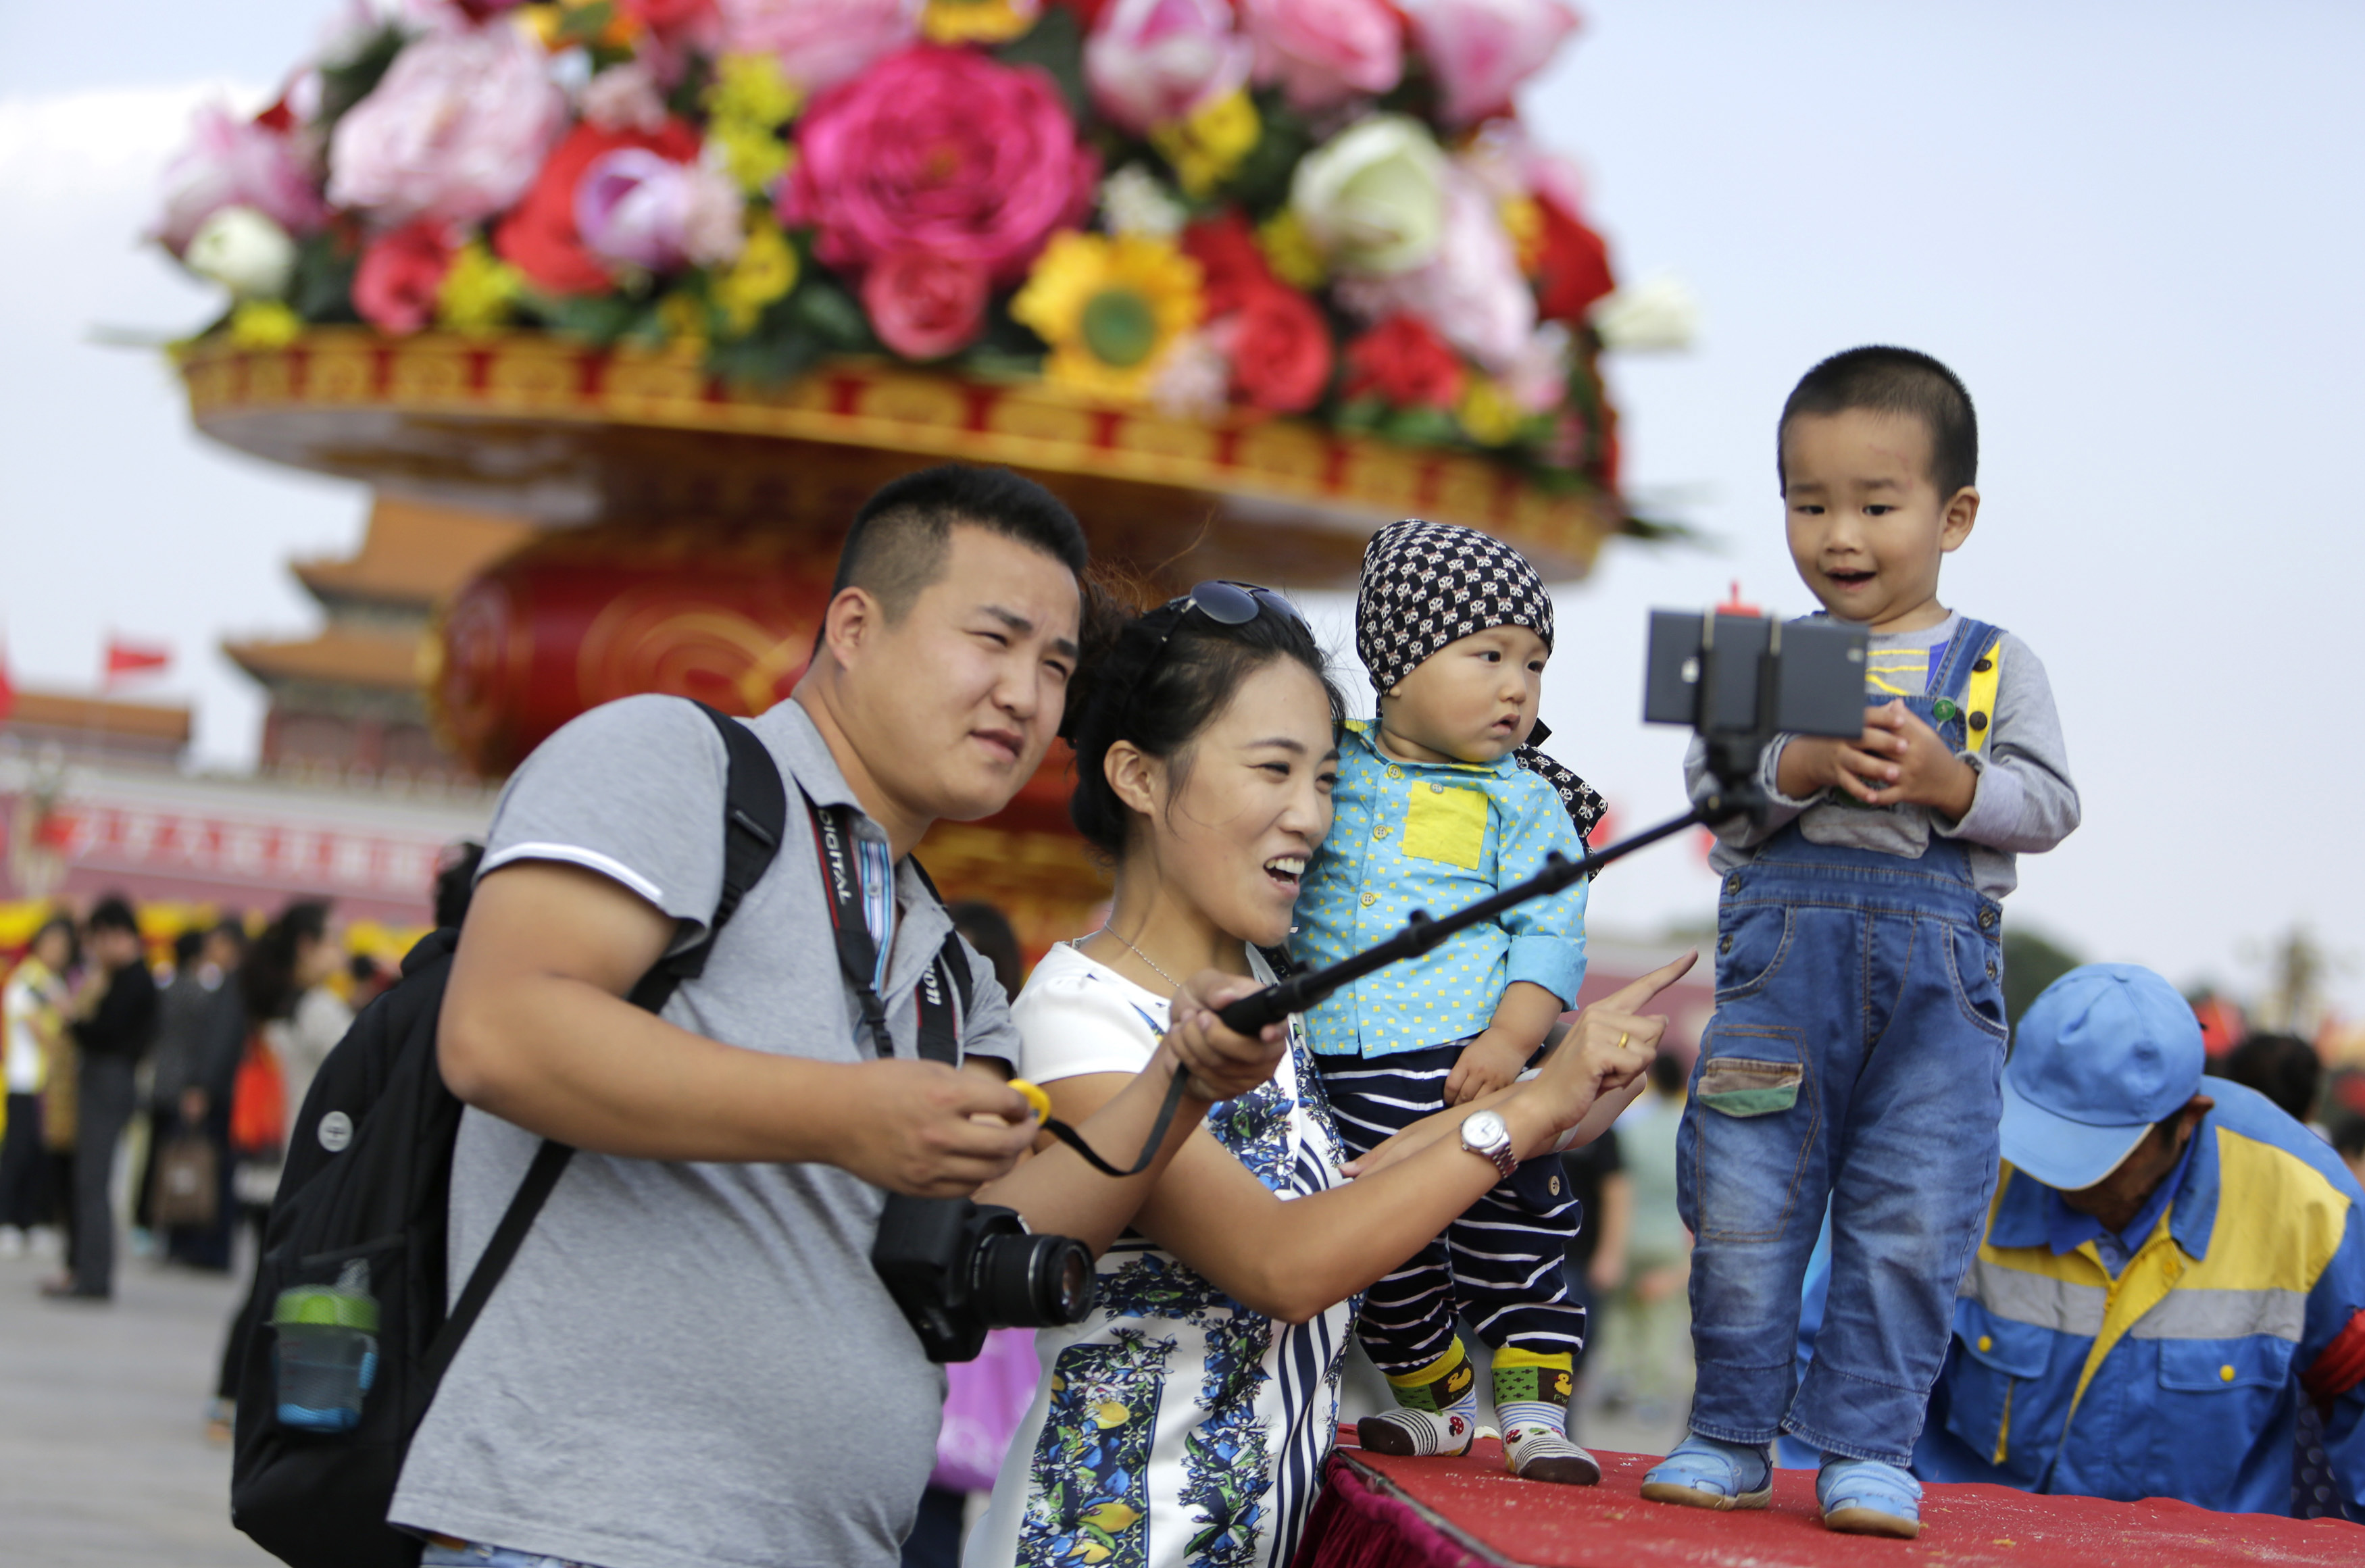 A family takes a "selfie" next to a boy in front of a giant basket of flowers on display at Tiananmen Square for the upcoming 65th National Day celebrations on Wednesday, in Beijing